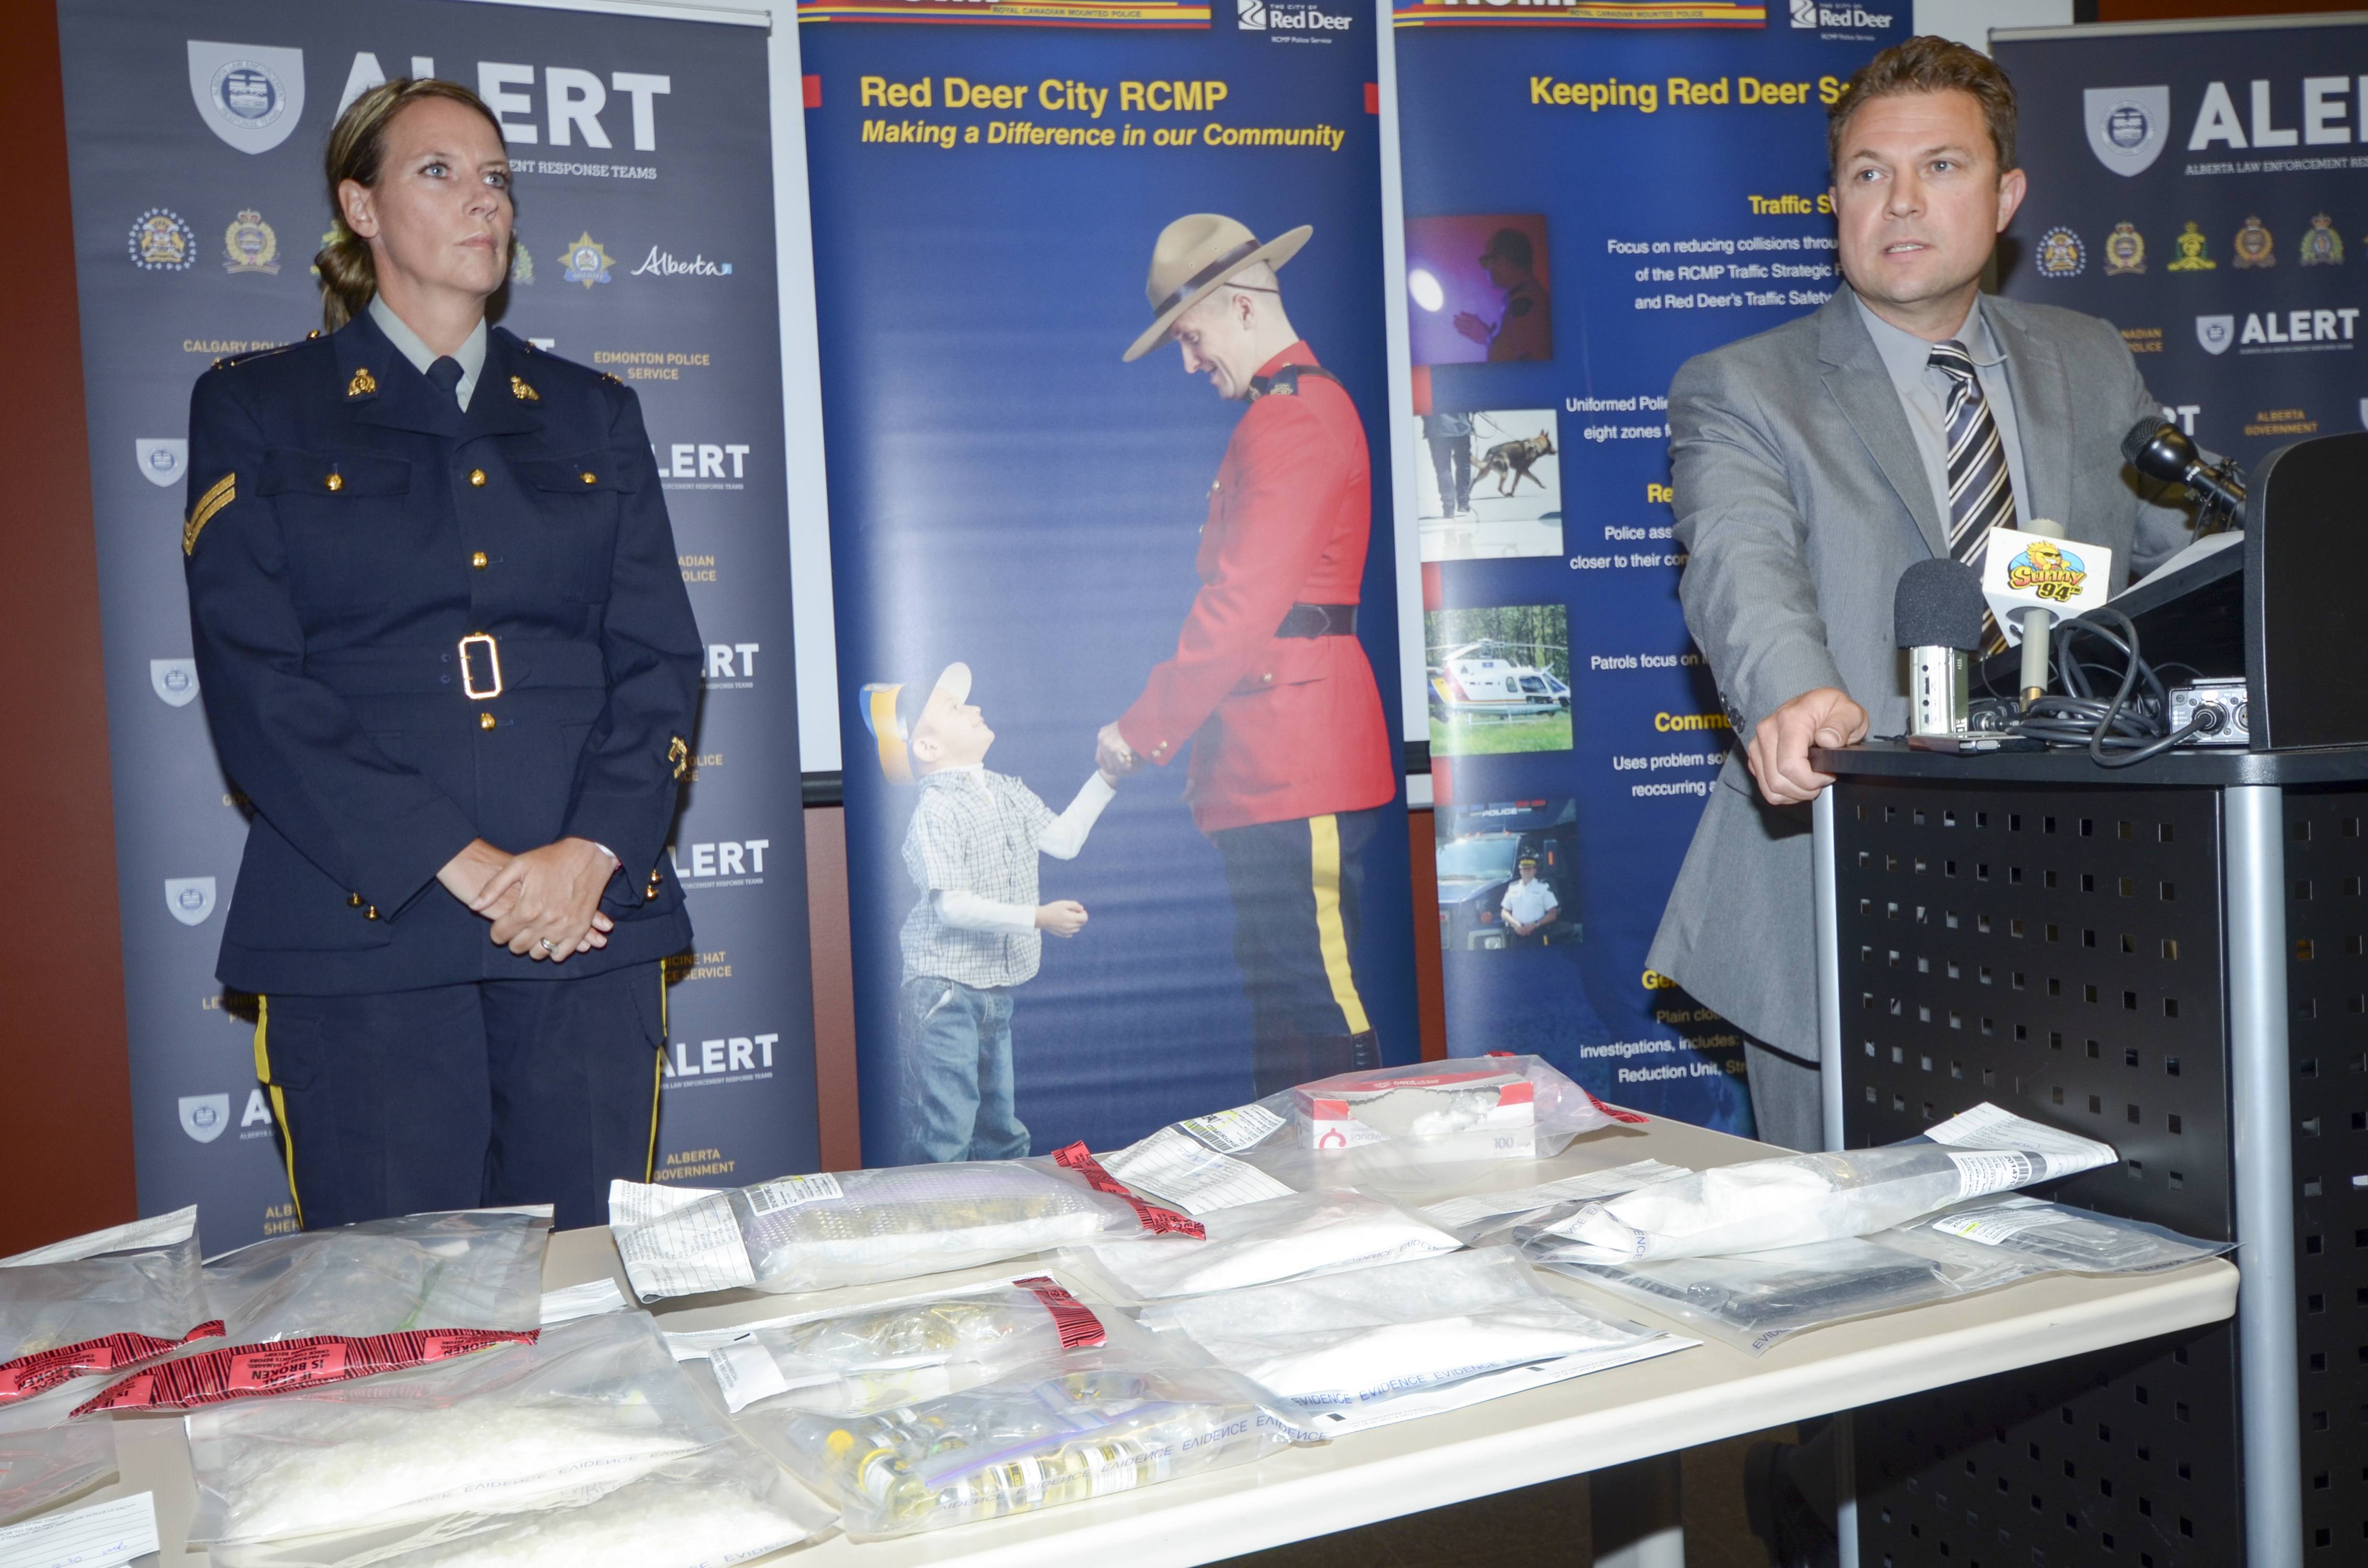 ARRESTS MADE - Sarah Knelsen of the Red Deer RCMP and Staff Sgt. Martin Schiavetta of ALERT- Calgary explain how Red Deer RCMP